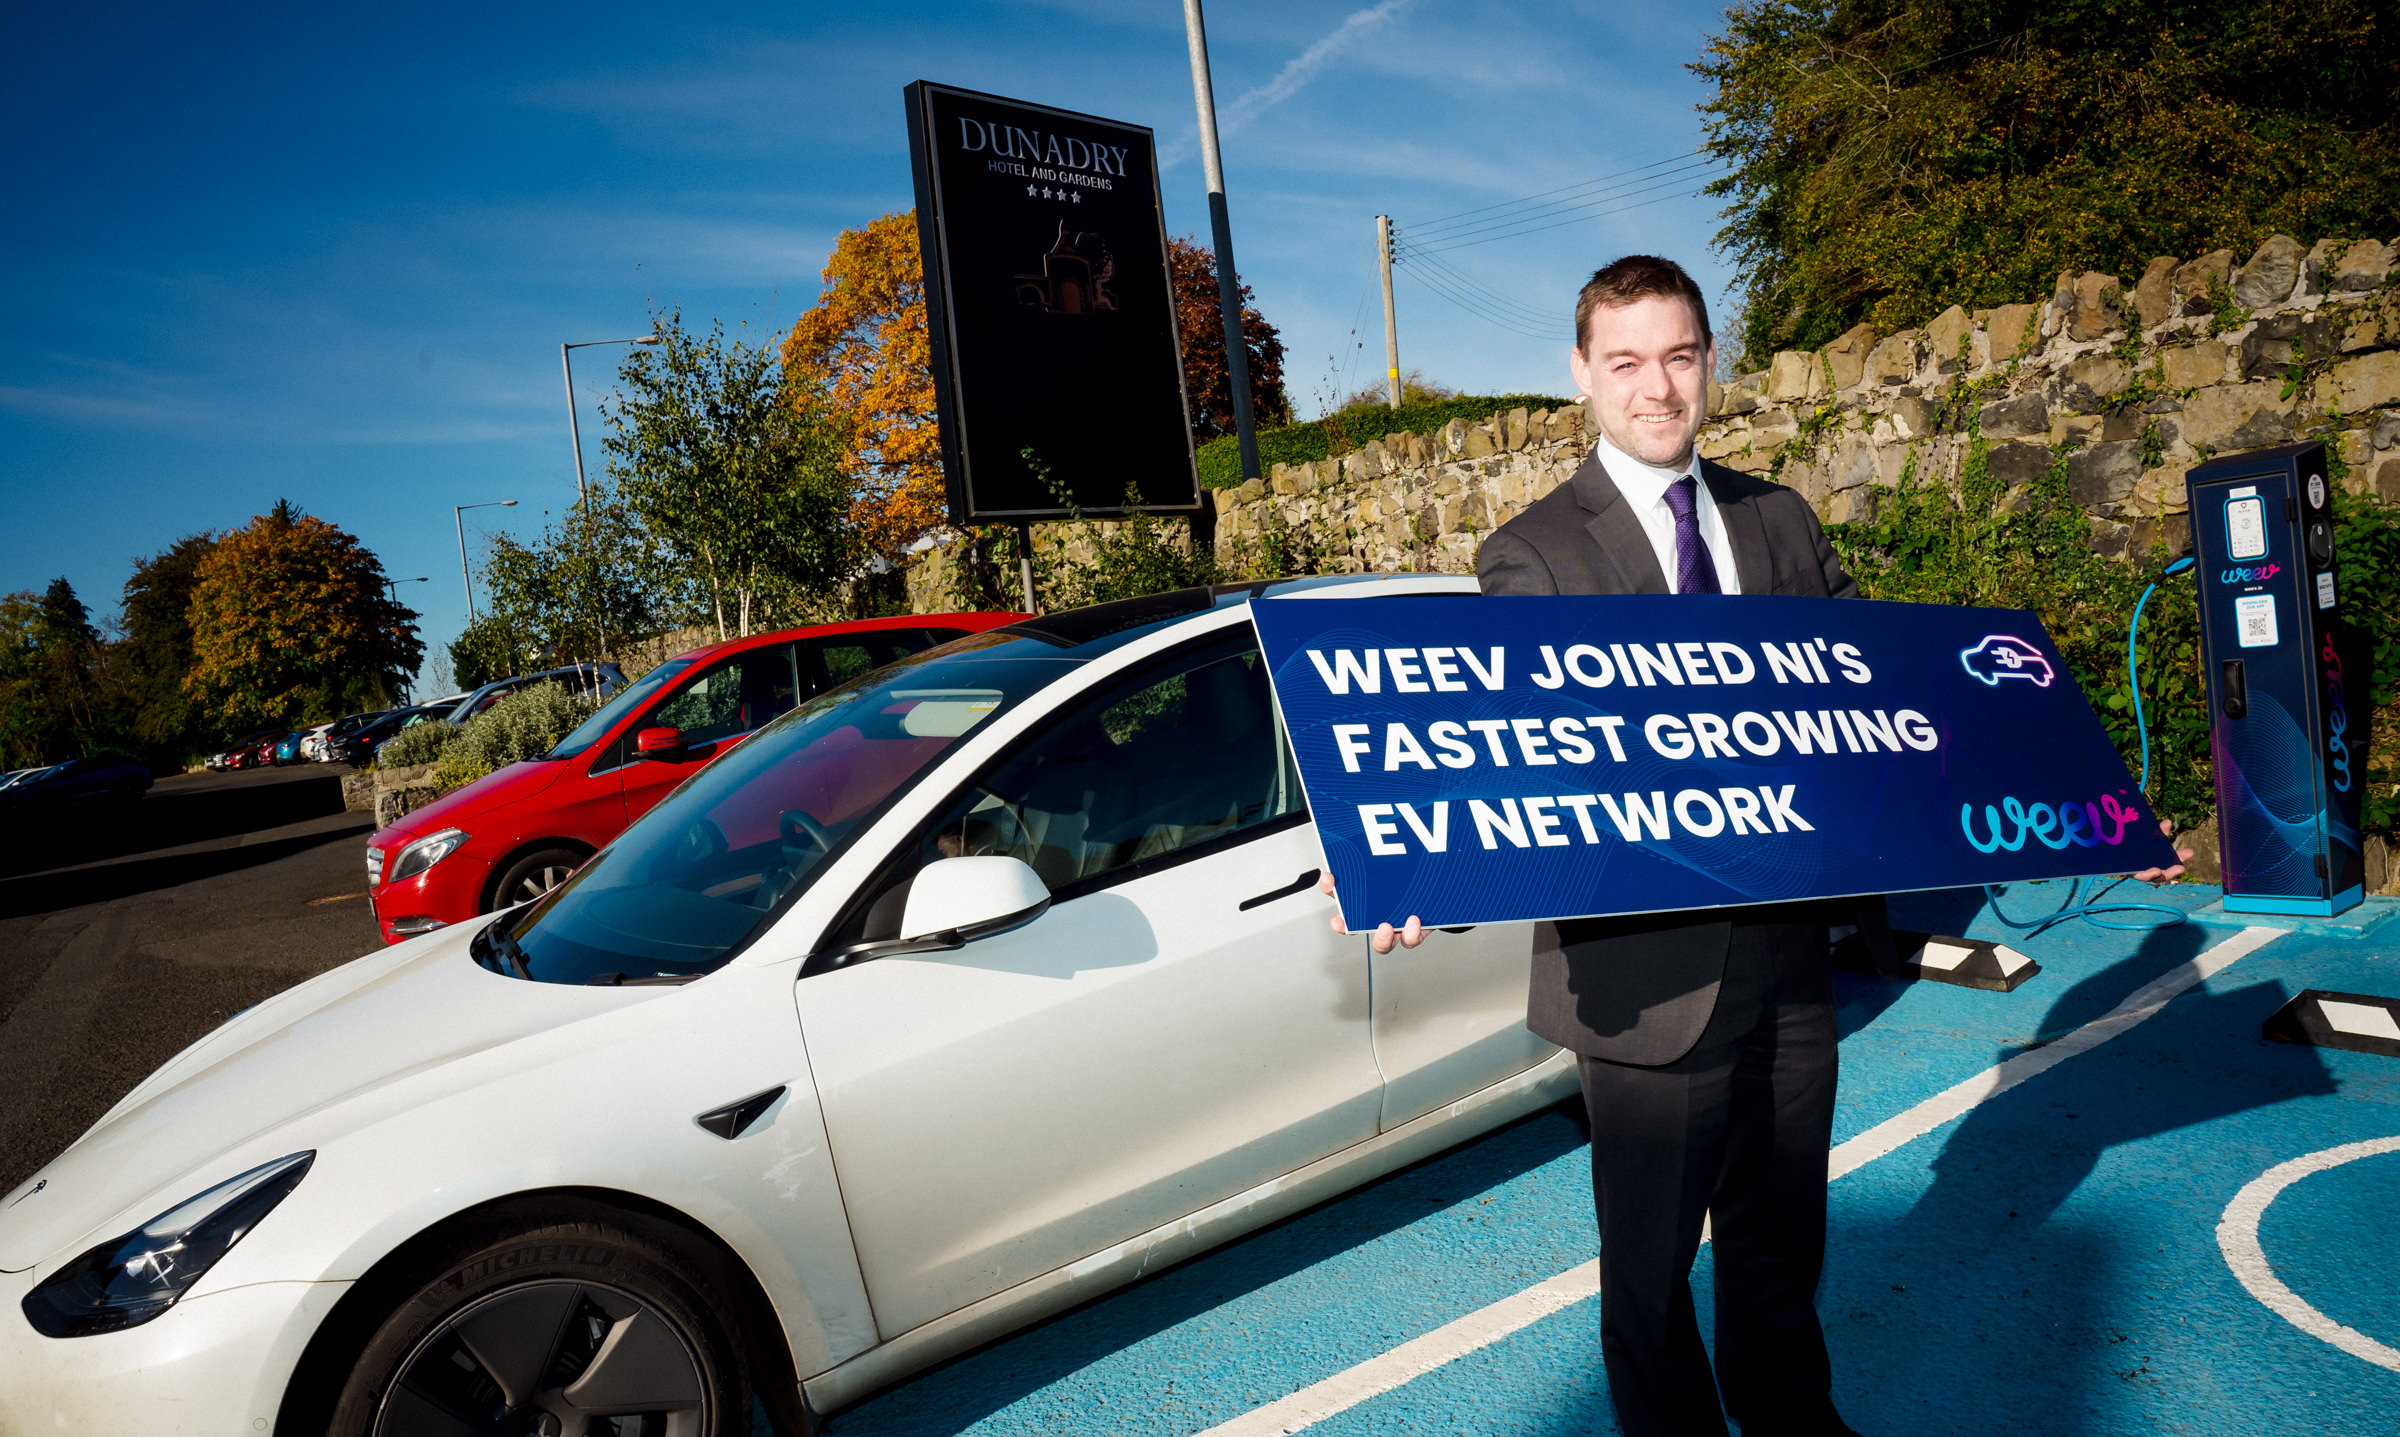 Weev installs EV charging points at The Dunadry Hotel as part of network expansion